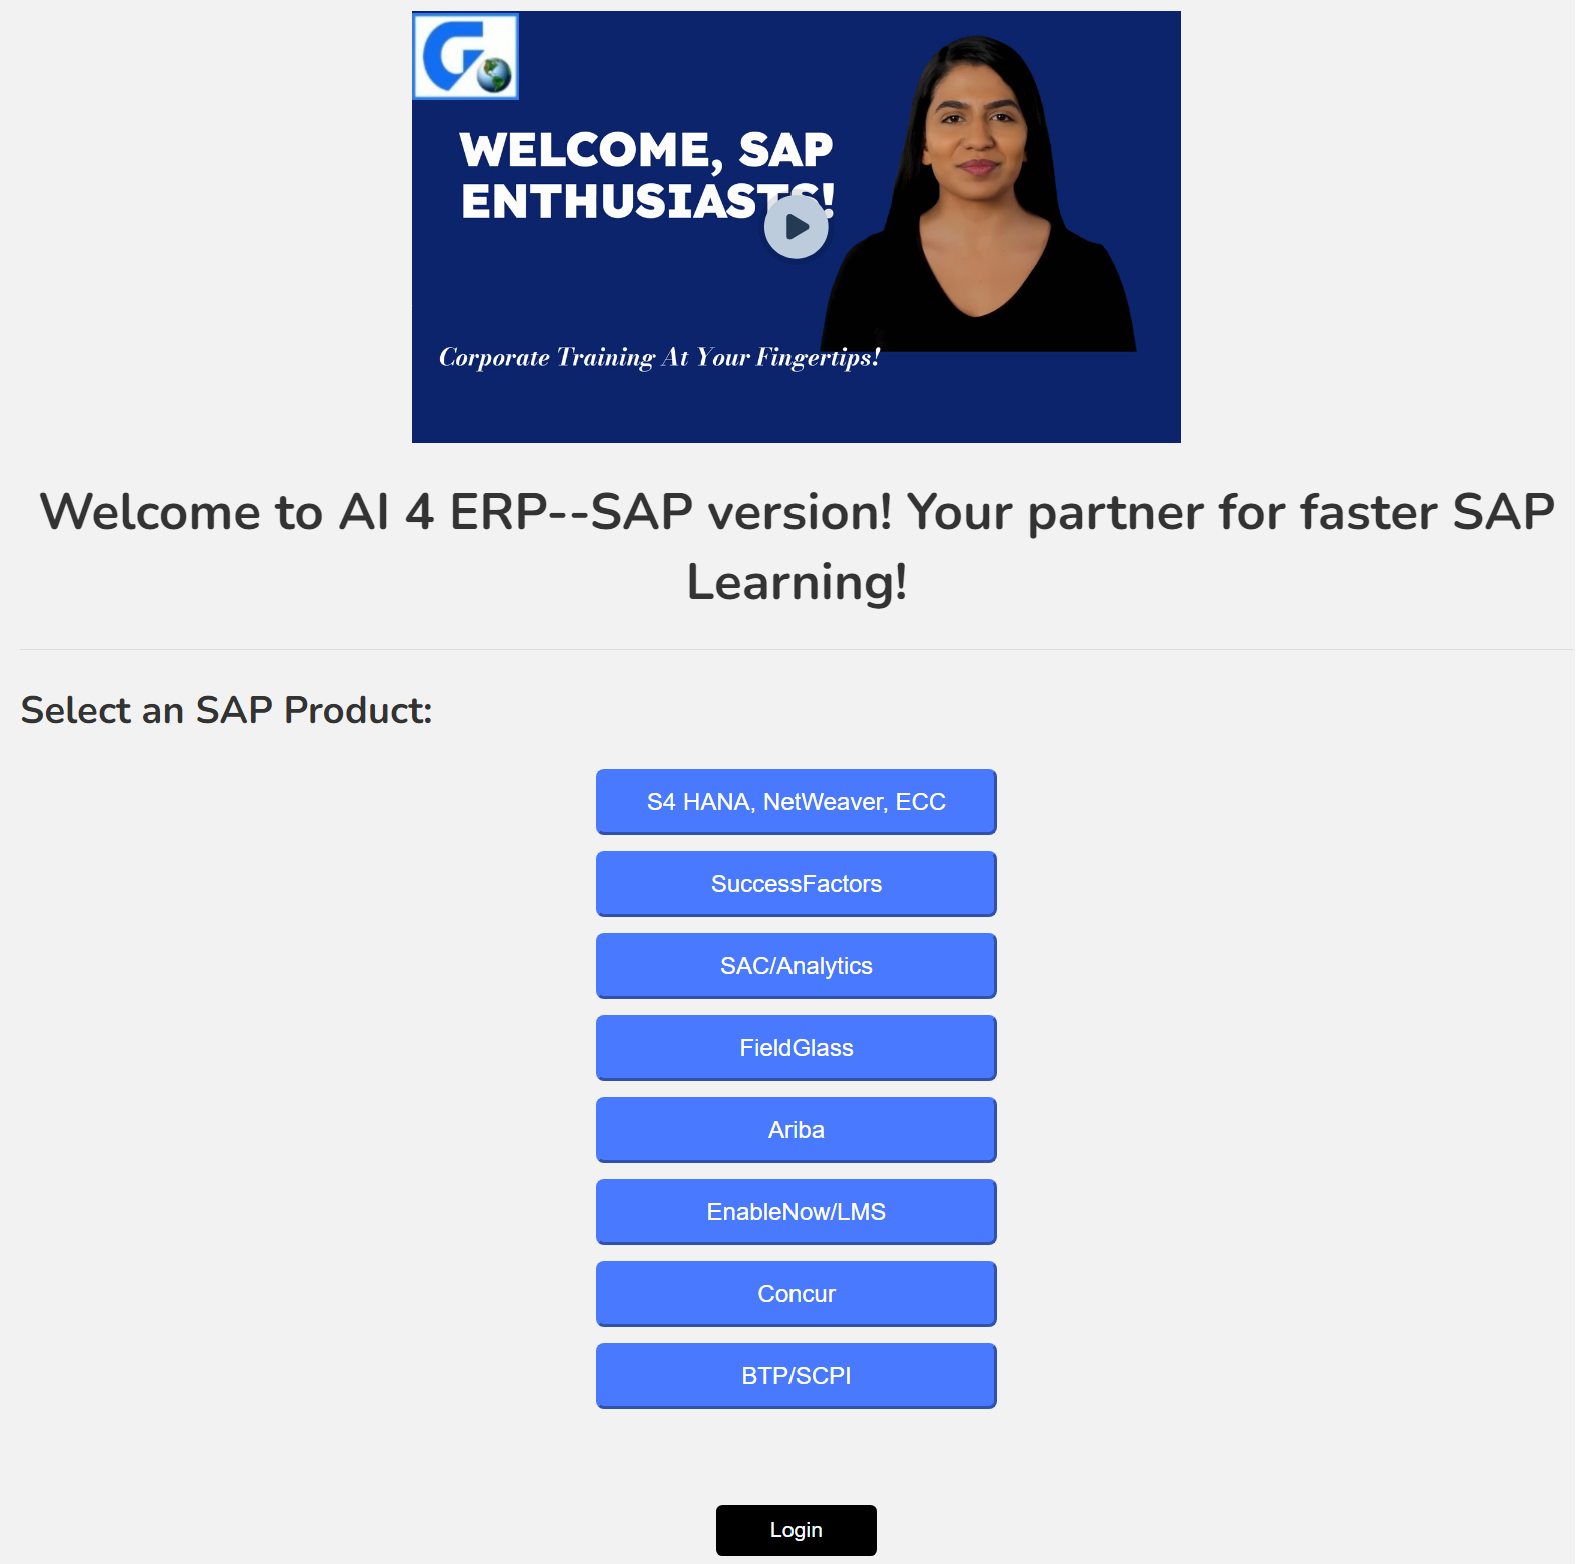 Your Personal CoPilot for SAP Training